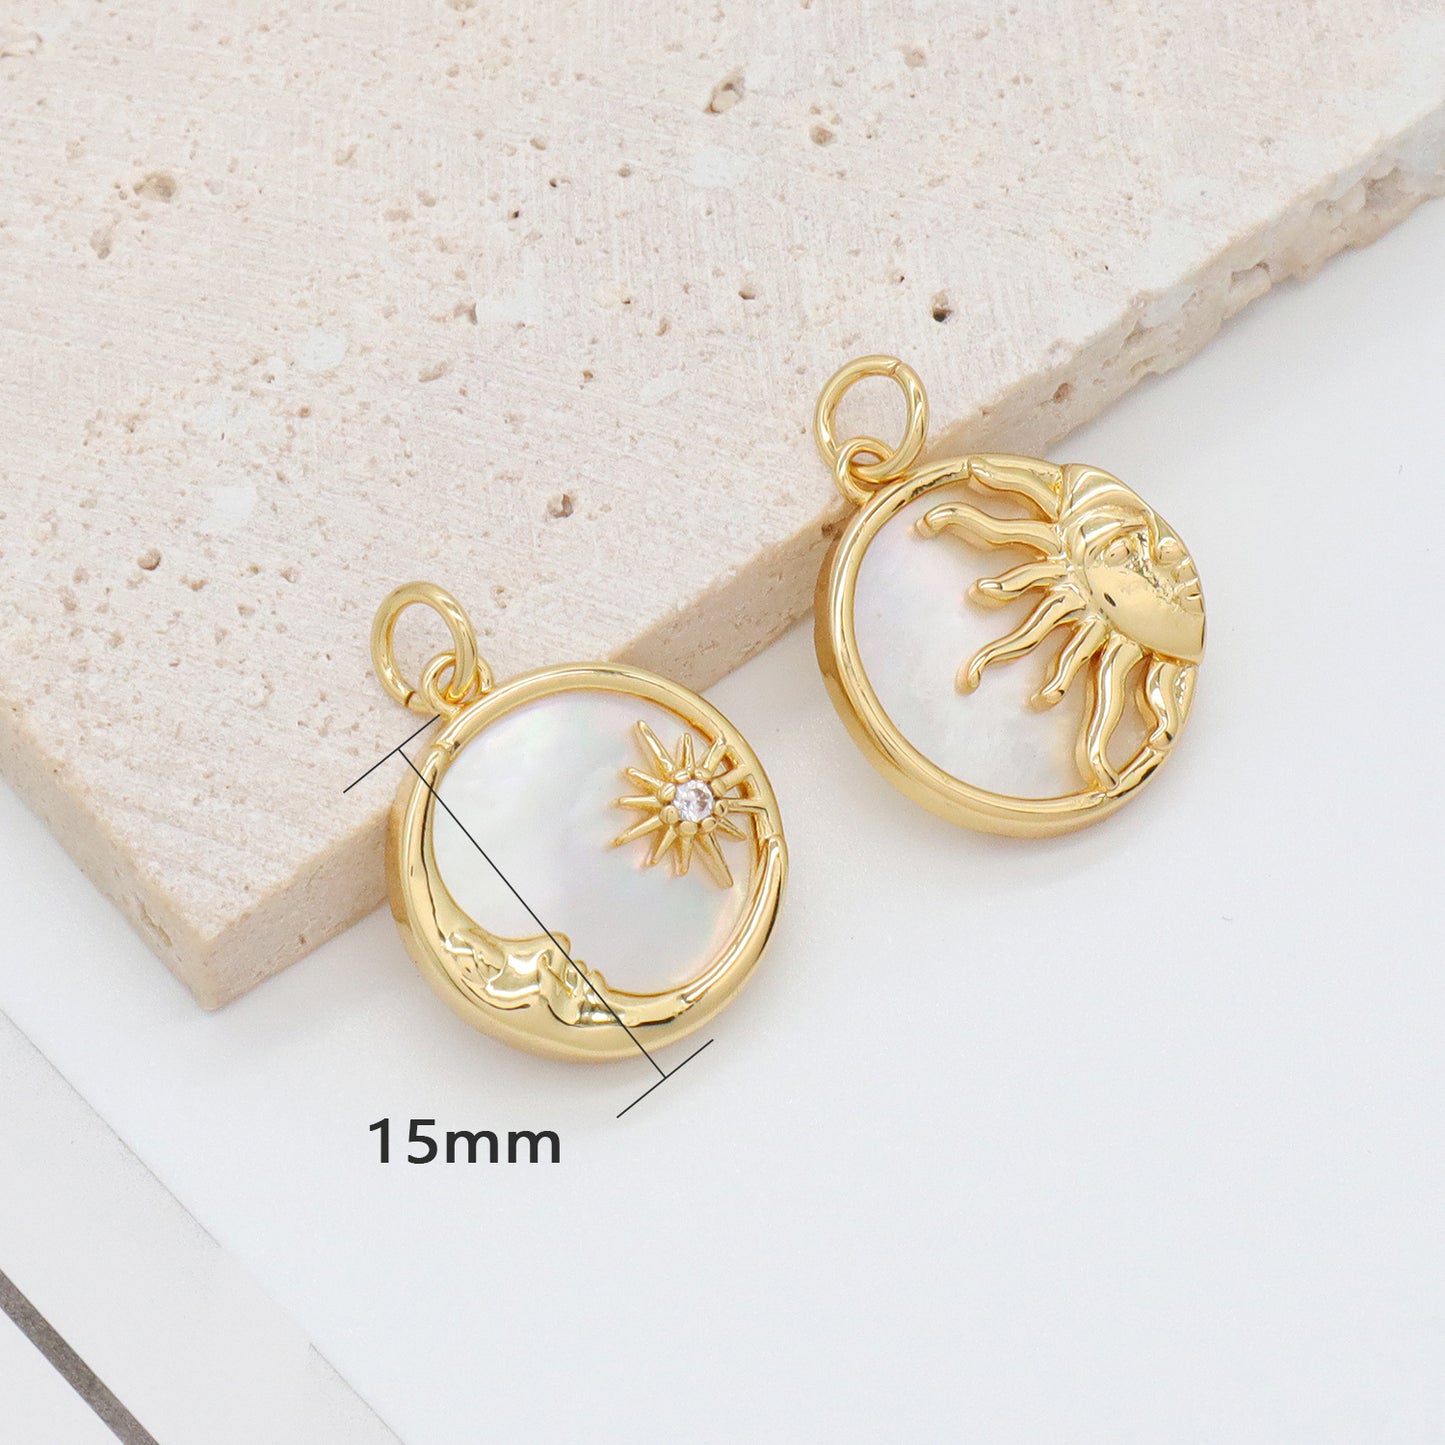 Fashion Wholesale Custom Round Shell Necklace Pendant Jewelry Cz Gold Plated Shells Sun Moon Charm Pendant For Women